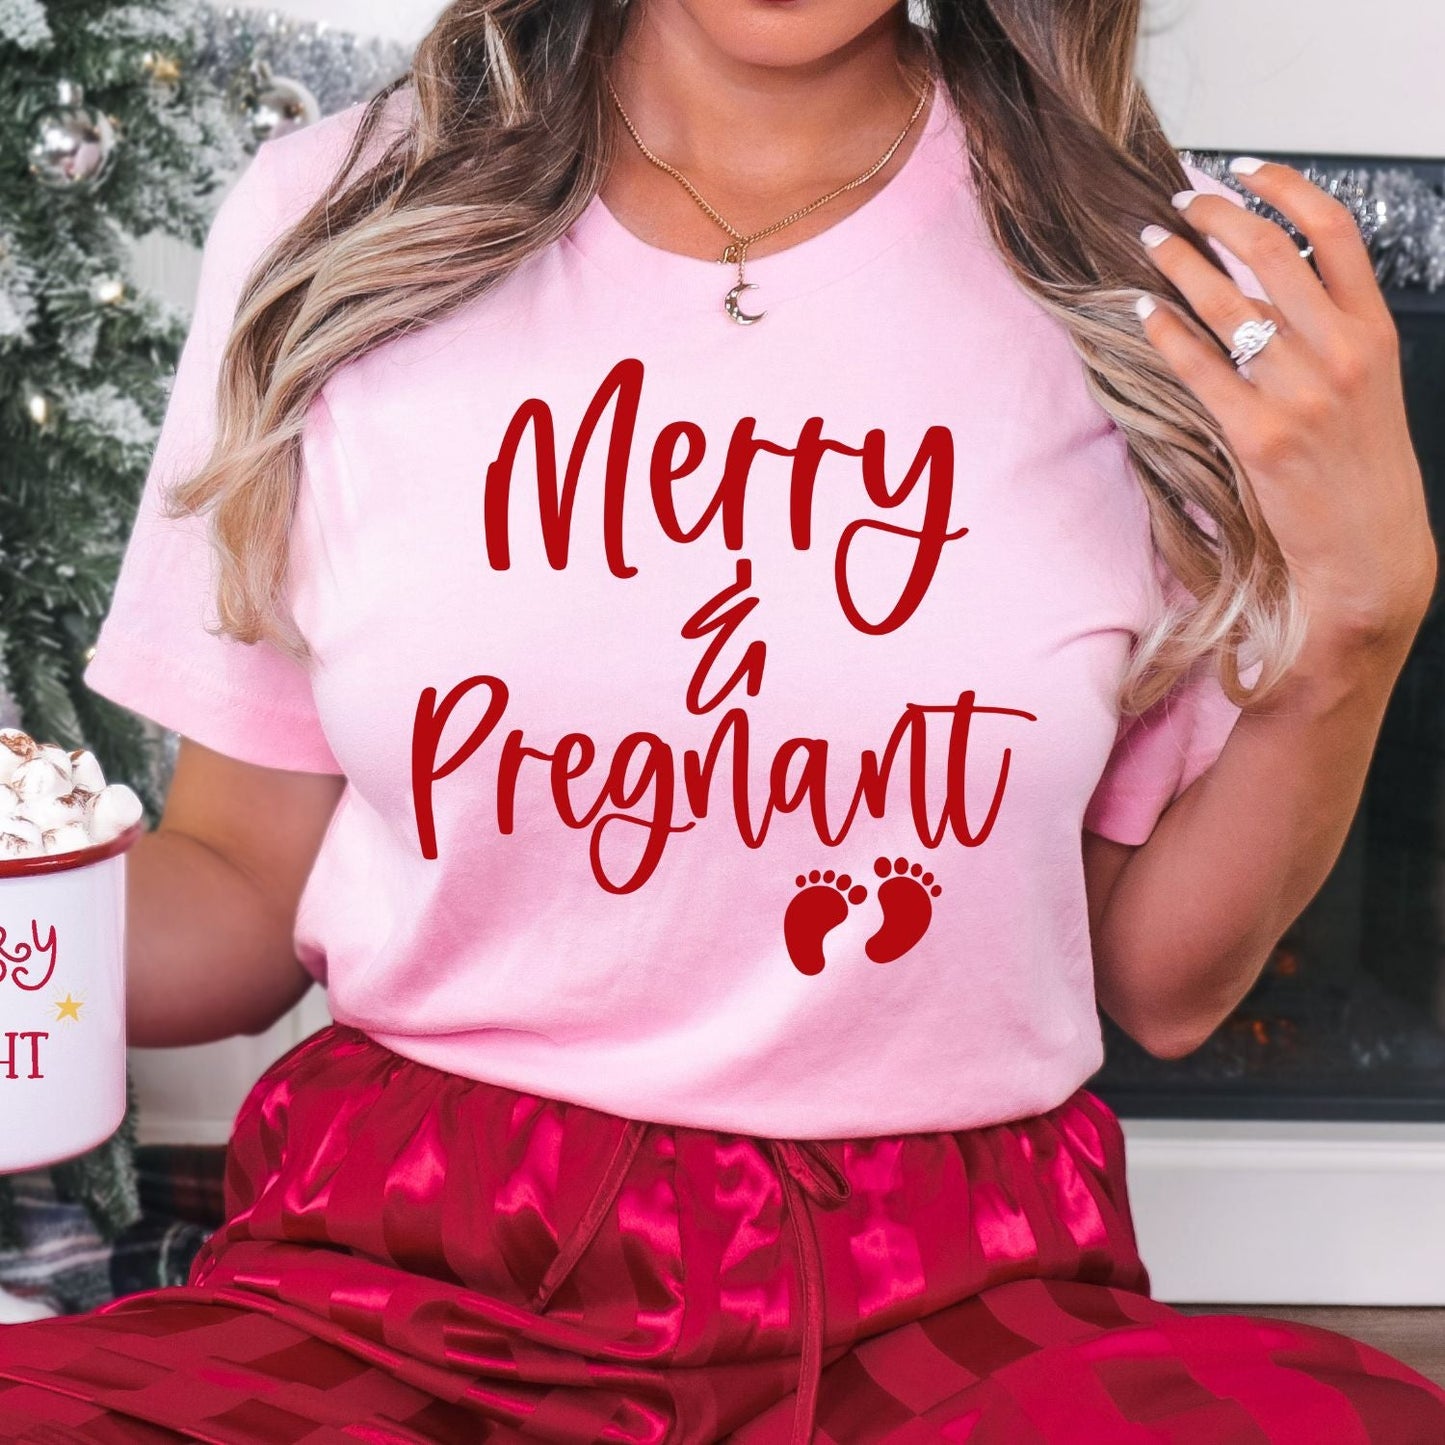 Merry and Pregnant